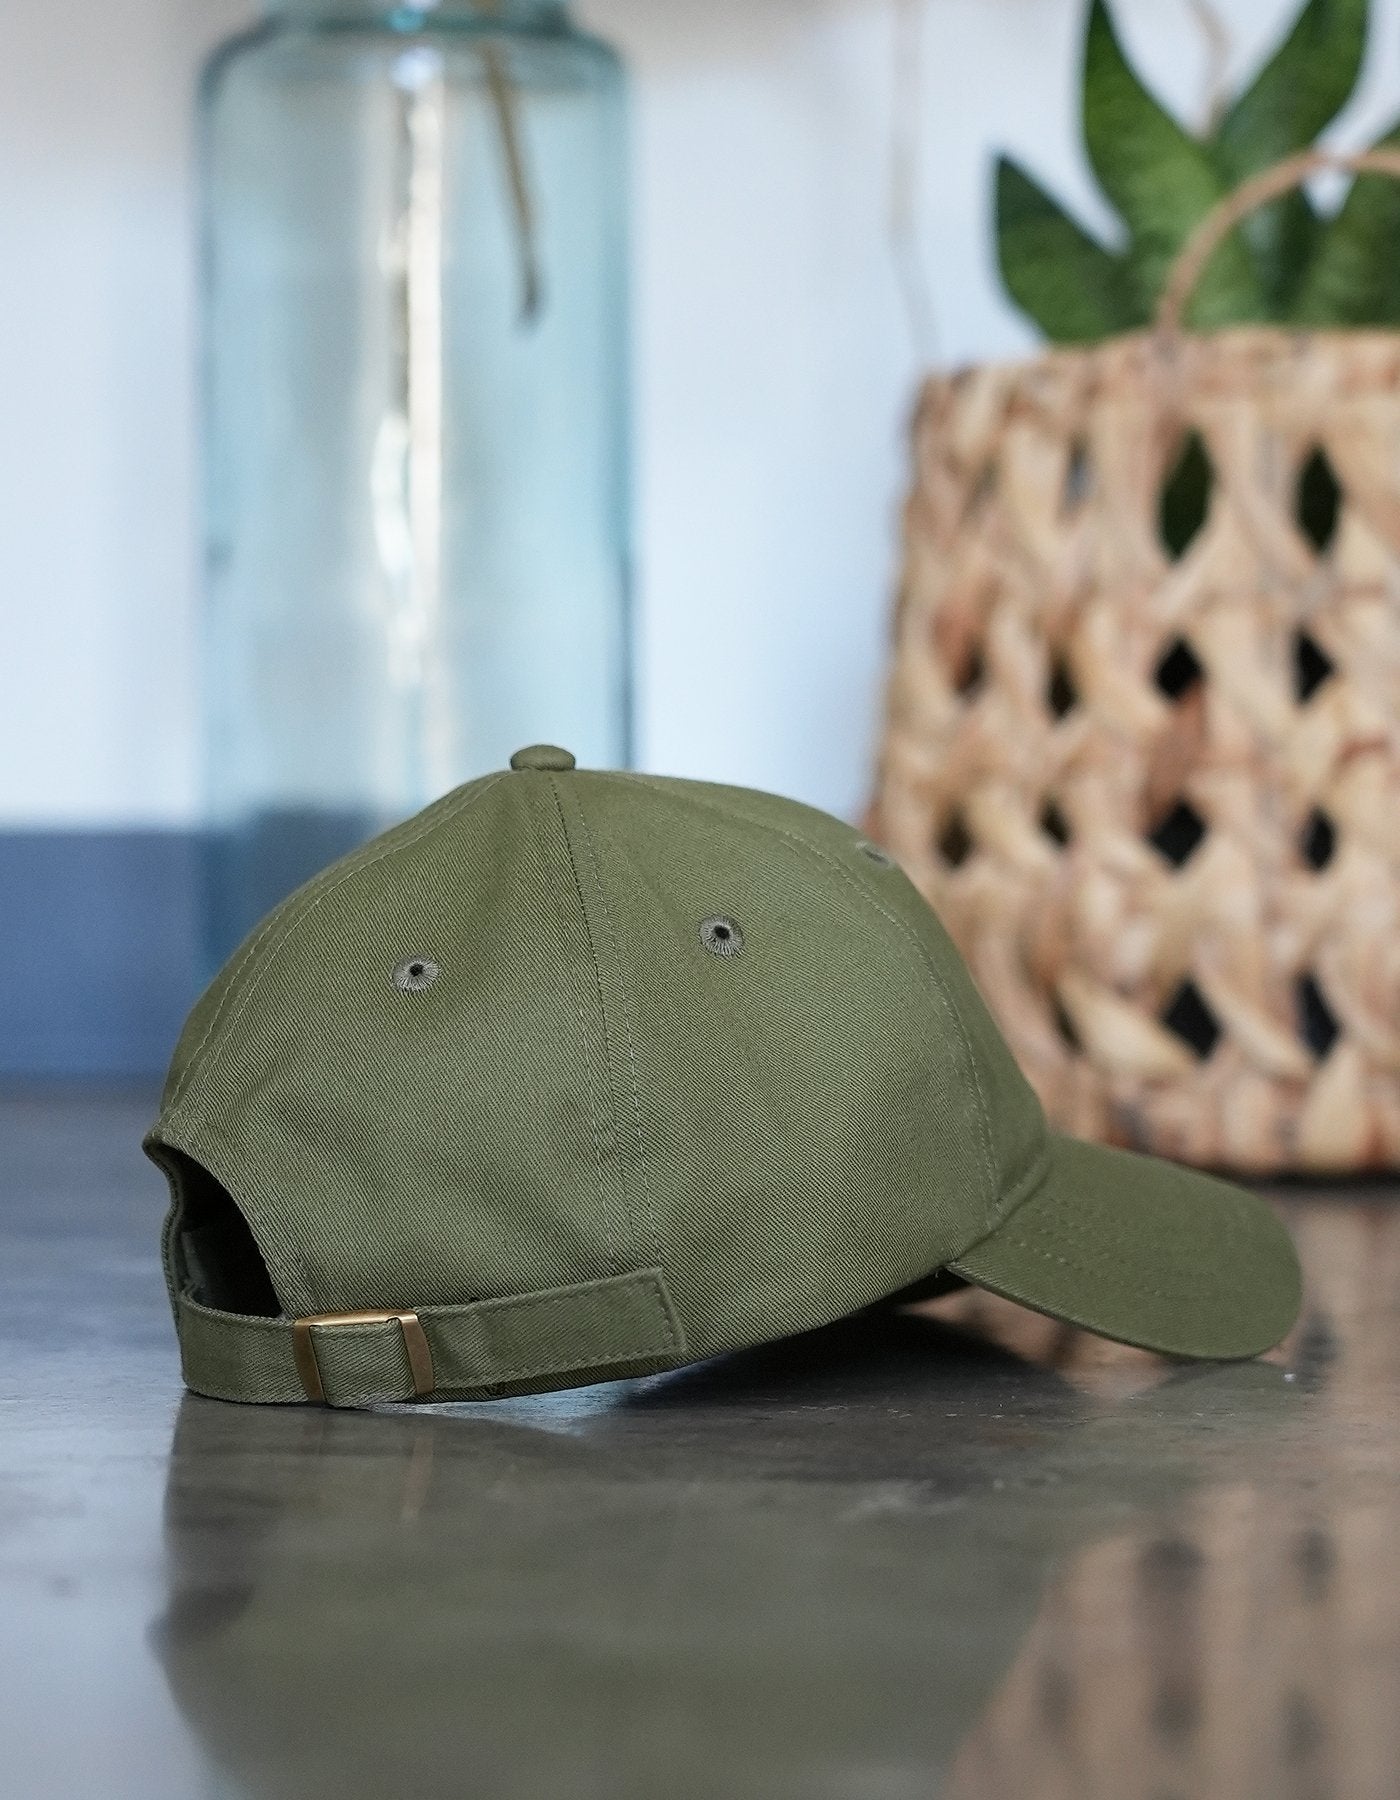 Crimson tavernorlando aloha dad hat in the color olive green. Showcasing the back and the beautiful bronze hardware on the adjustable strap